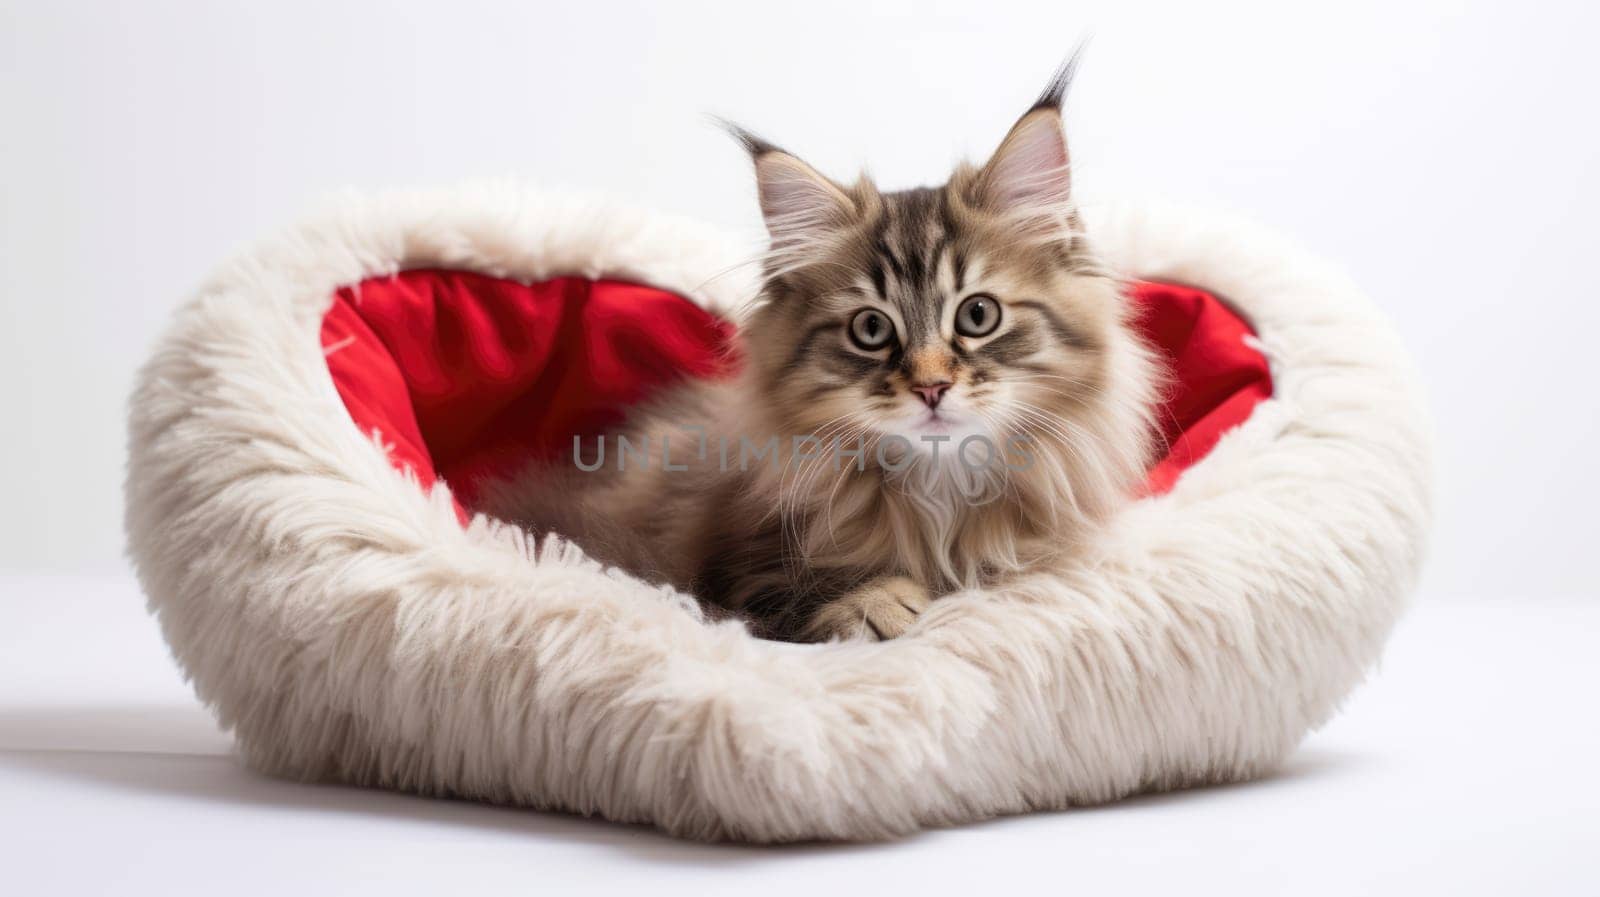 Valentines Day kitten. Small striped kitten playing with red heart on pink looking at camera. Adorable domestic kitty pets concept.